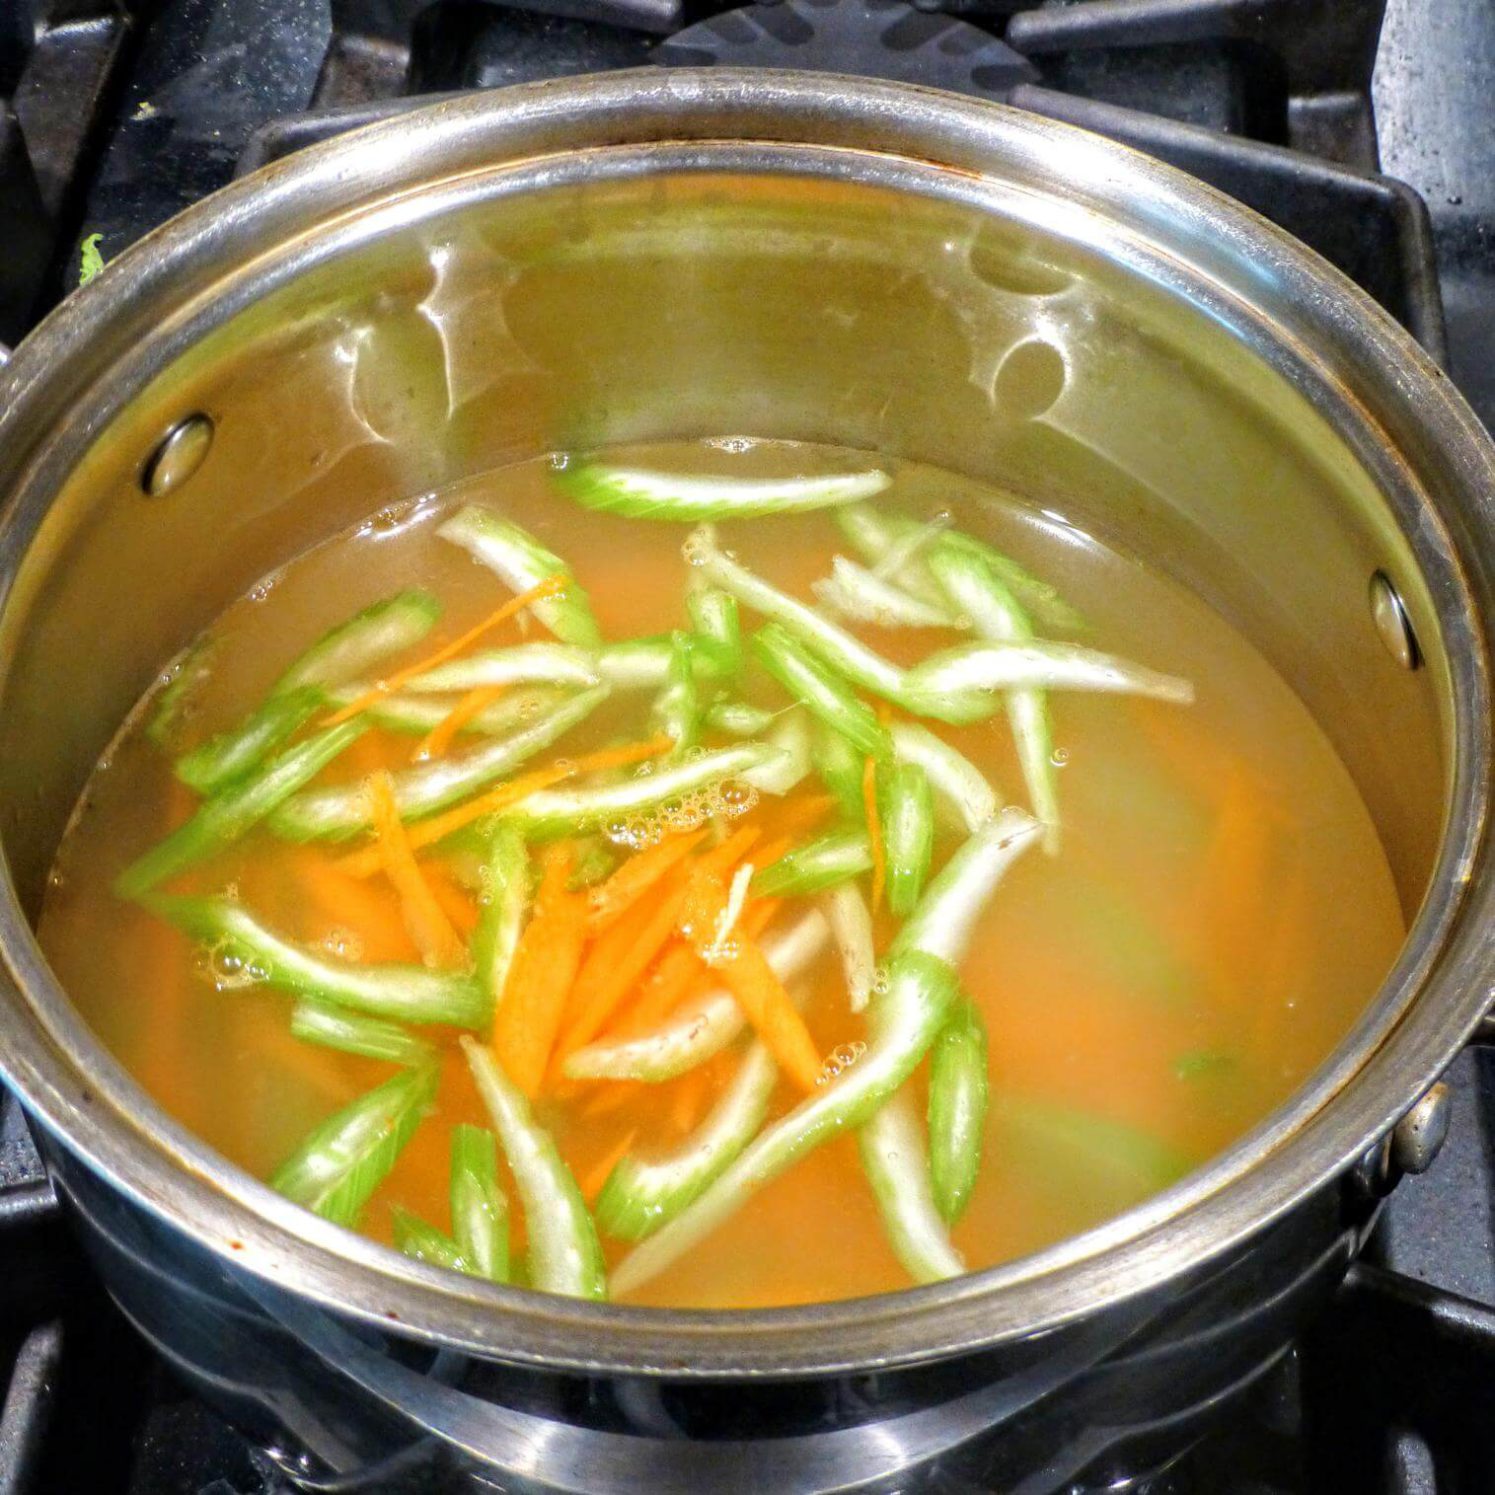 blanching the vegetables